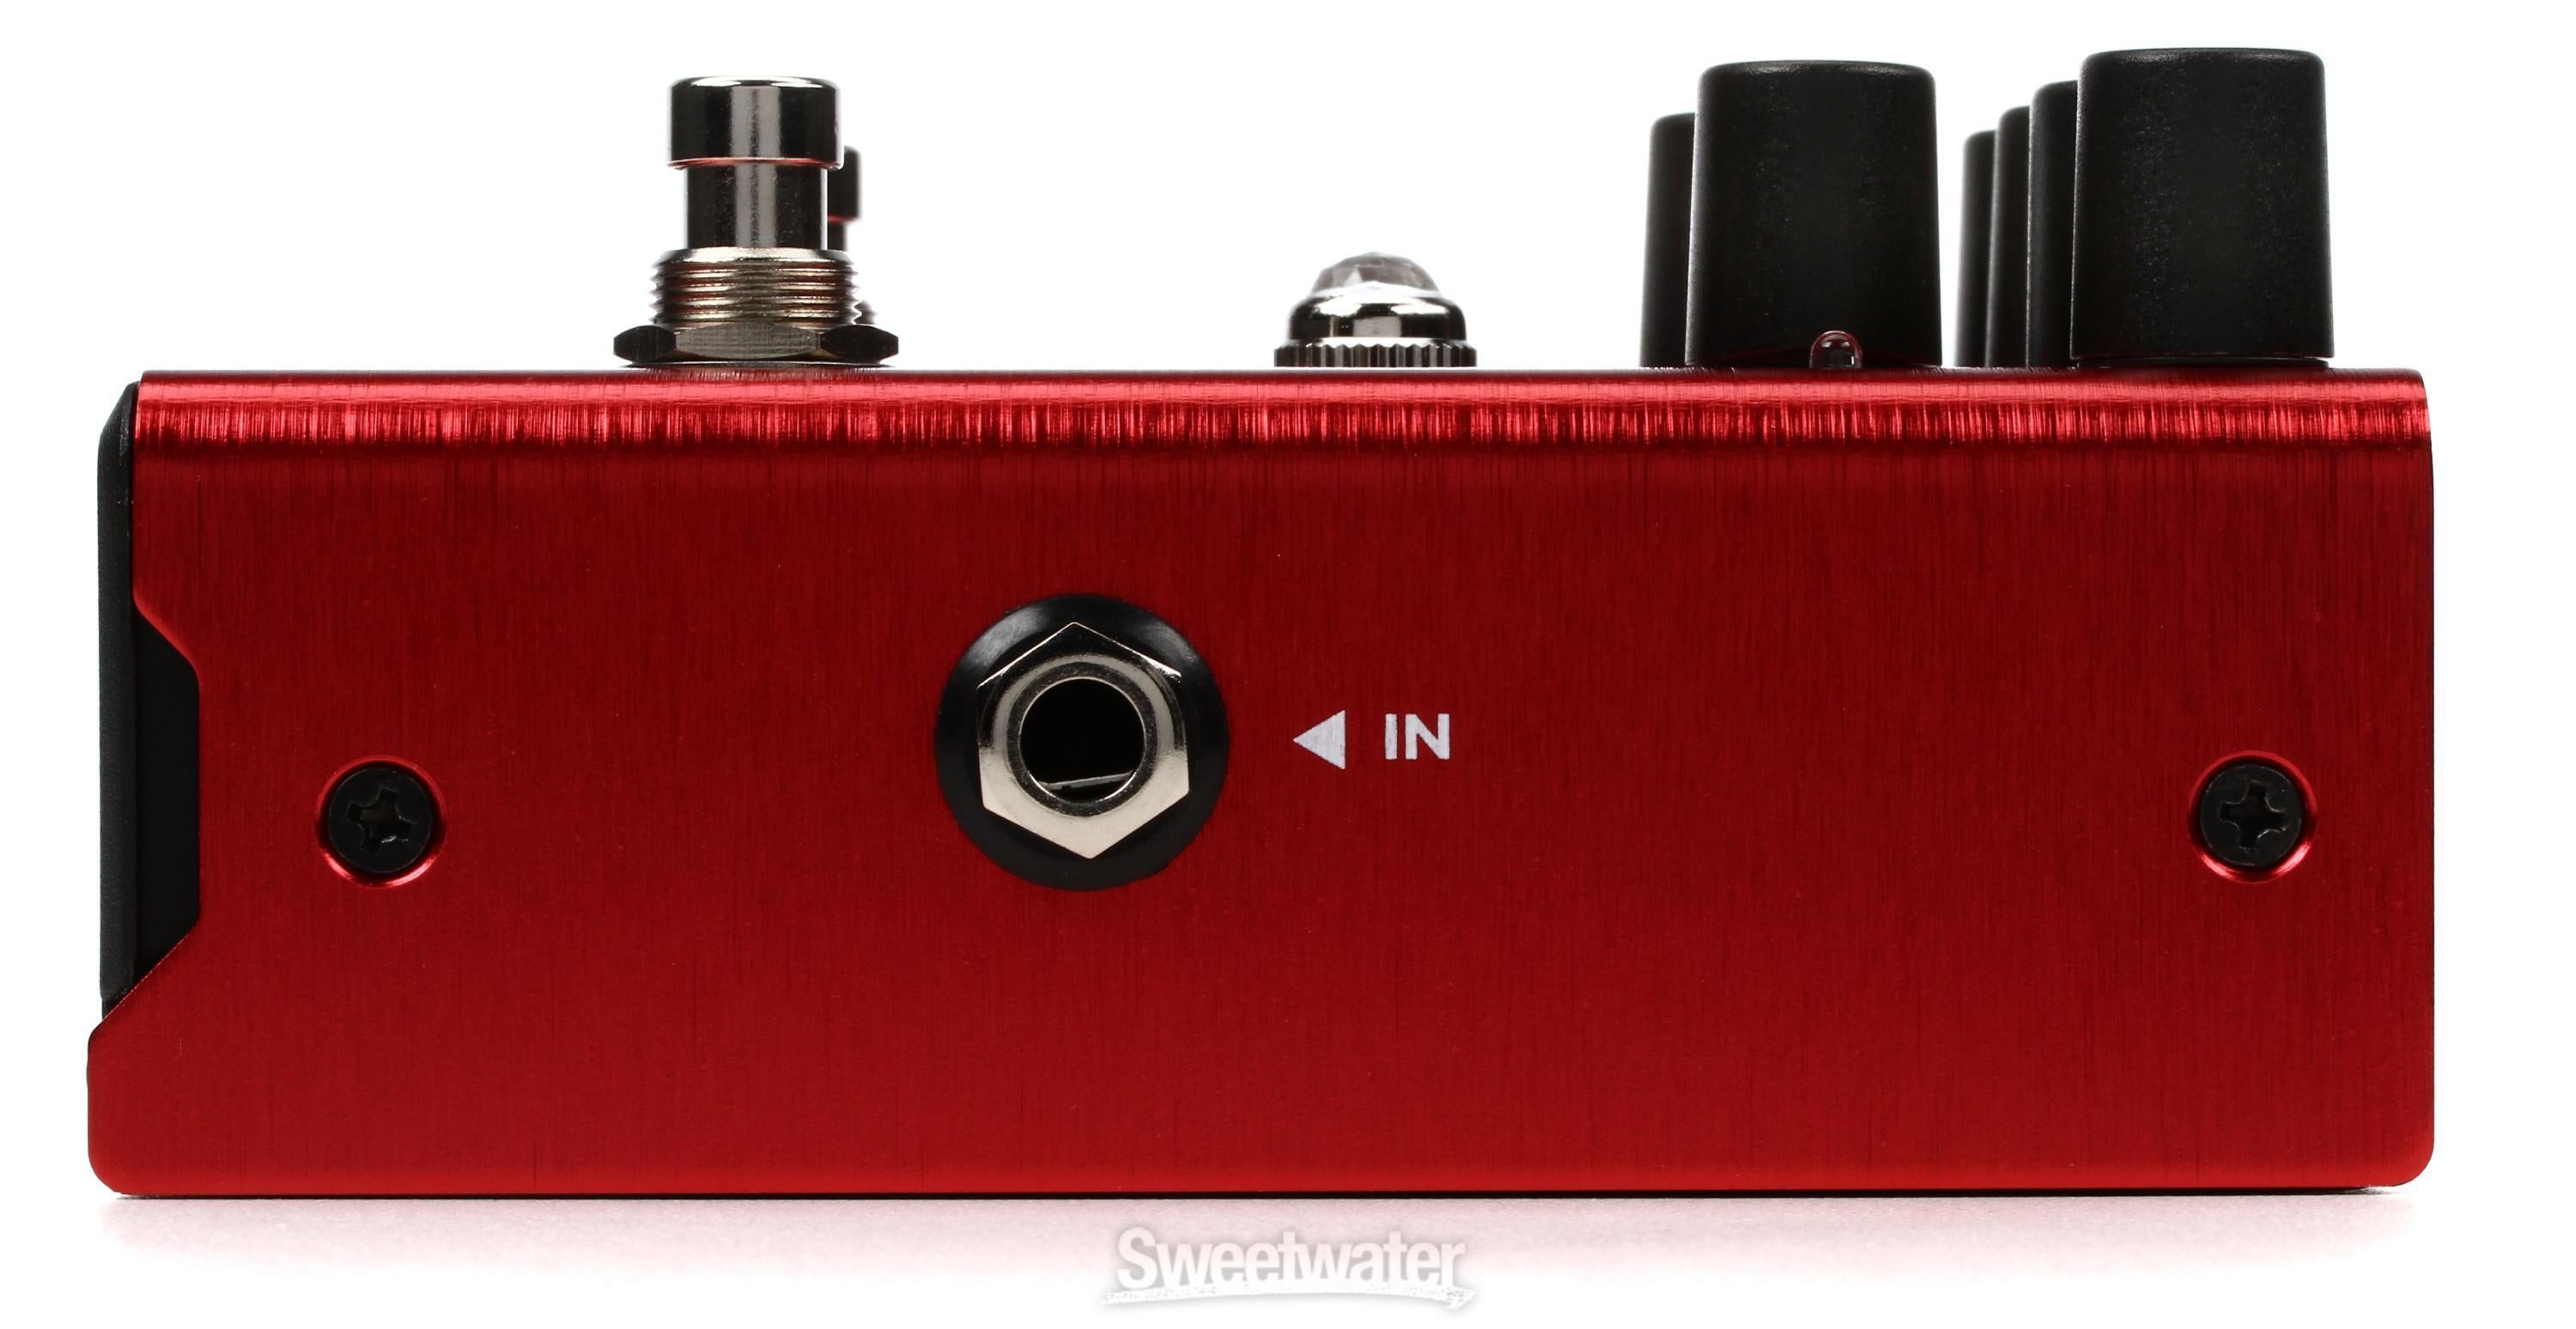 Fender Santa Ana Overdrive Pedal | Sweetwater